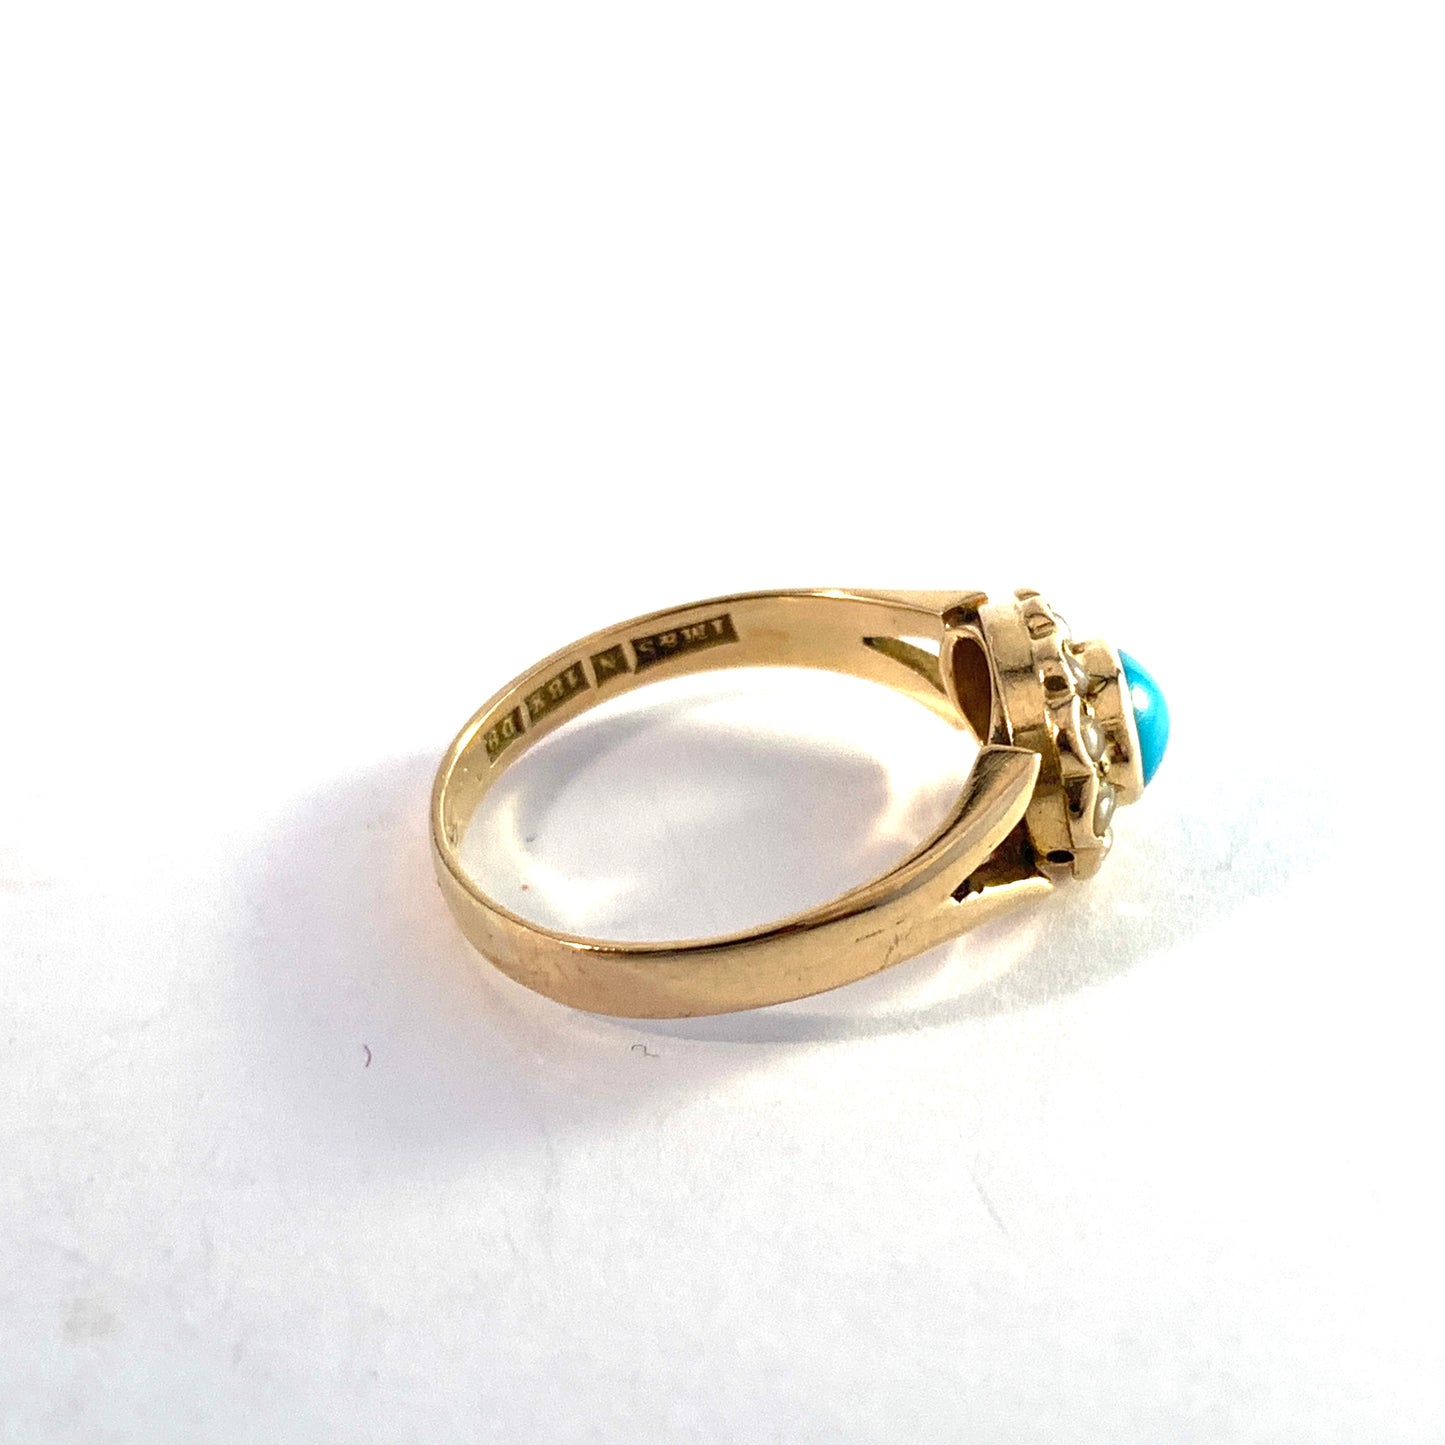 Isak Mobeck & Sons, Sweden 1954. Vintage Mid Century 18k Gold Turquoise Seed Pearl Ring.